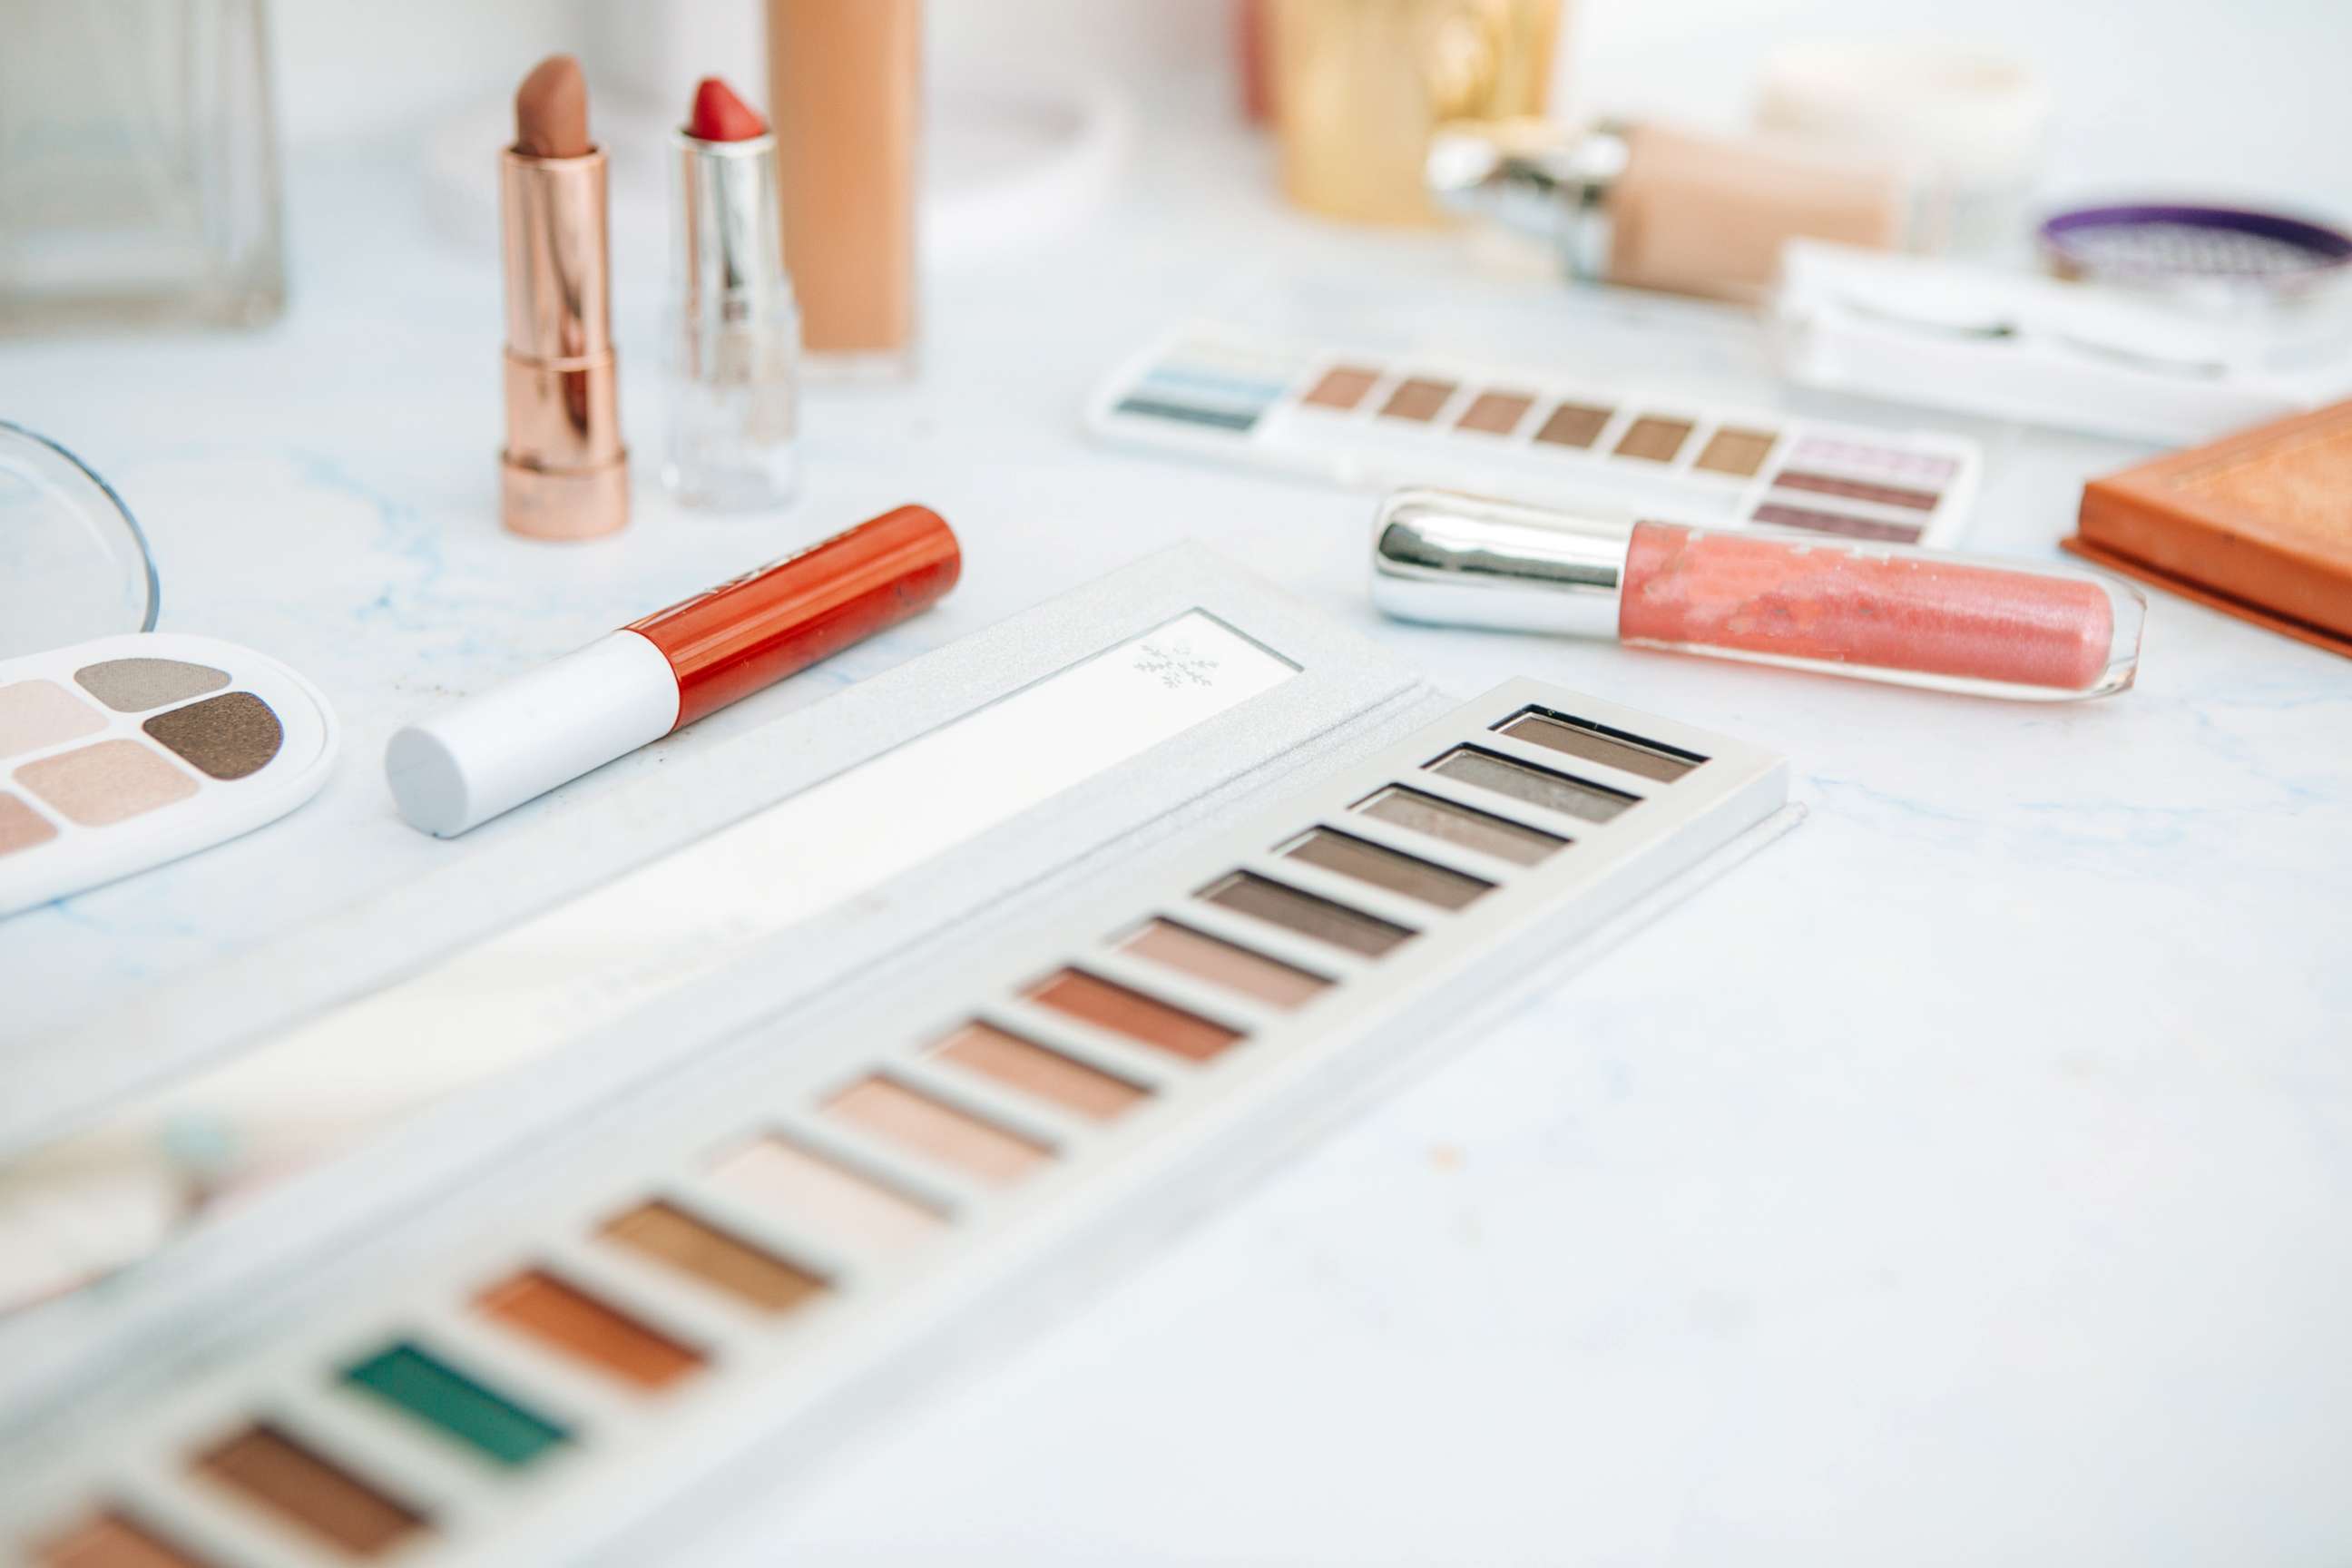 PHOTO: Beauty and makeup items lay on a counter in an undated stock image.